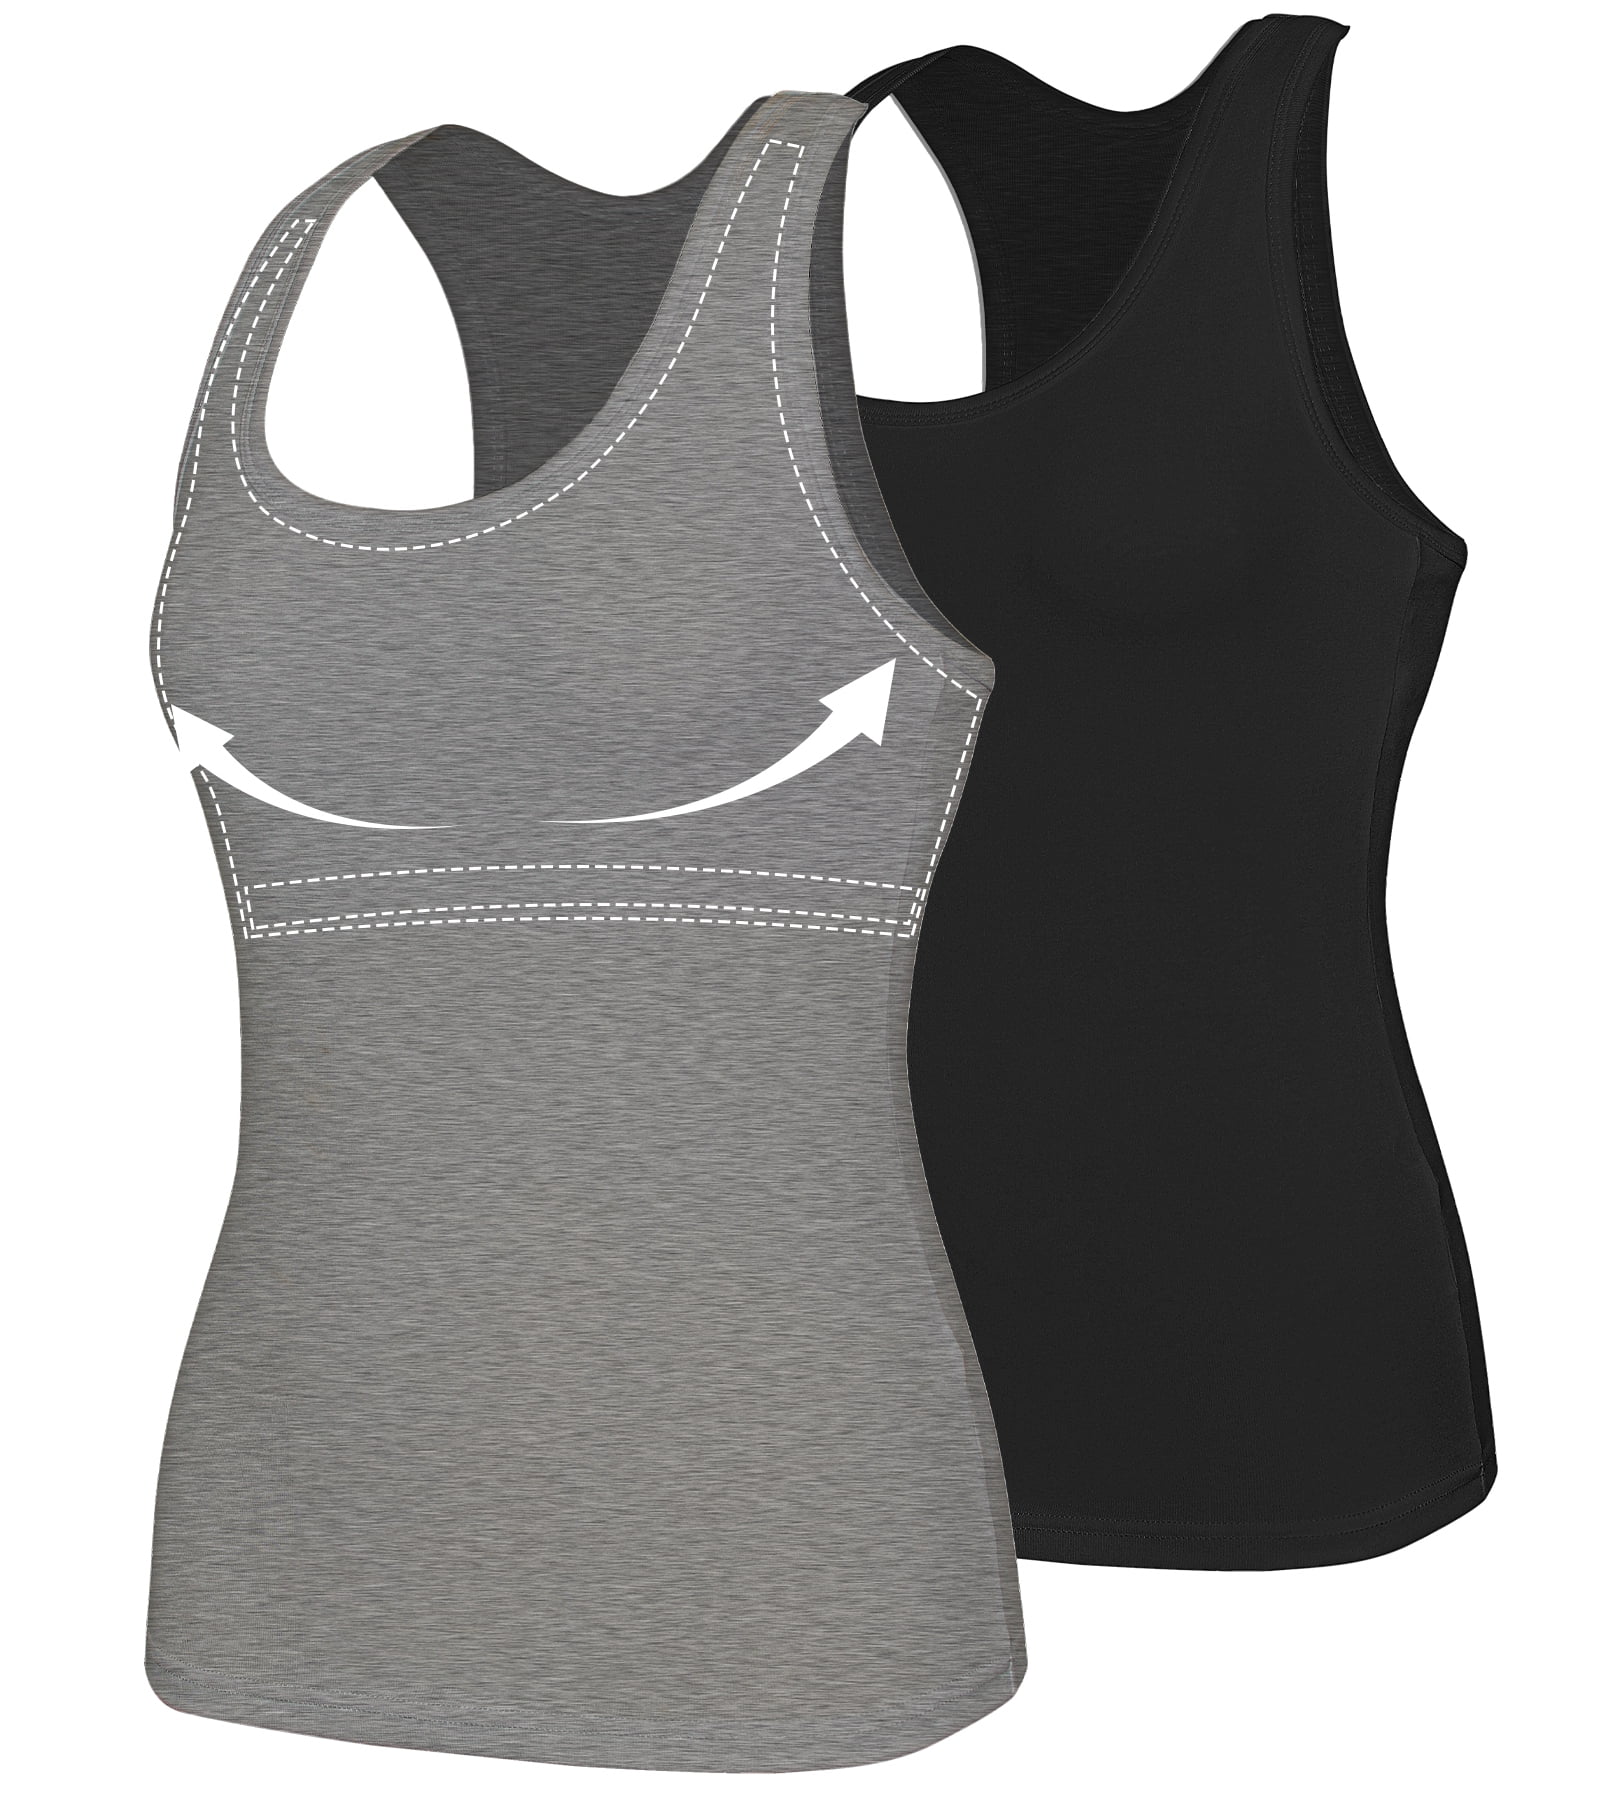 Anyfit Wear 2 Pack Racerback Workout Tank Tops With Shelf Bra for Women  Basic Athletic Tanks Yoga Undershirt Summer Sleeveless Exercise Tops  (S-3XL) 